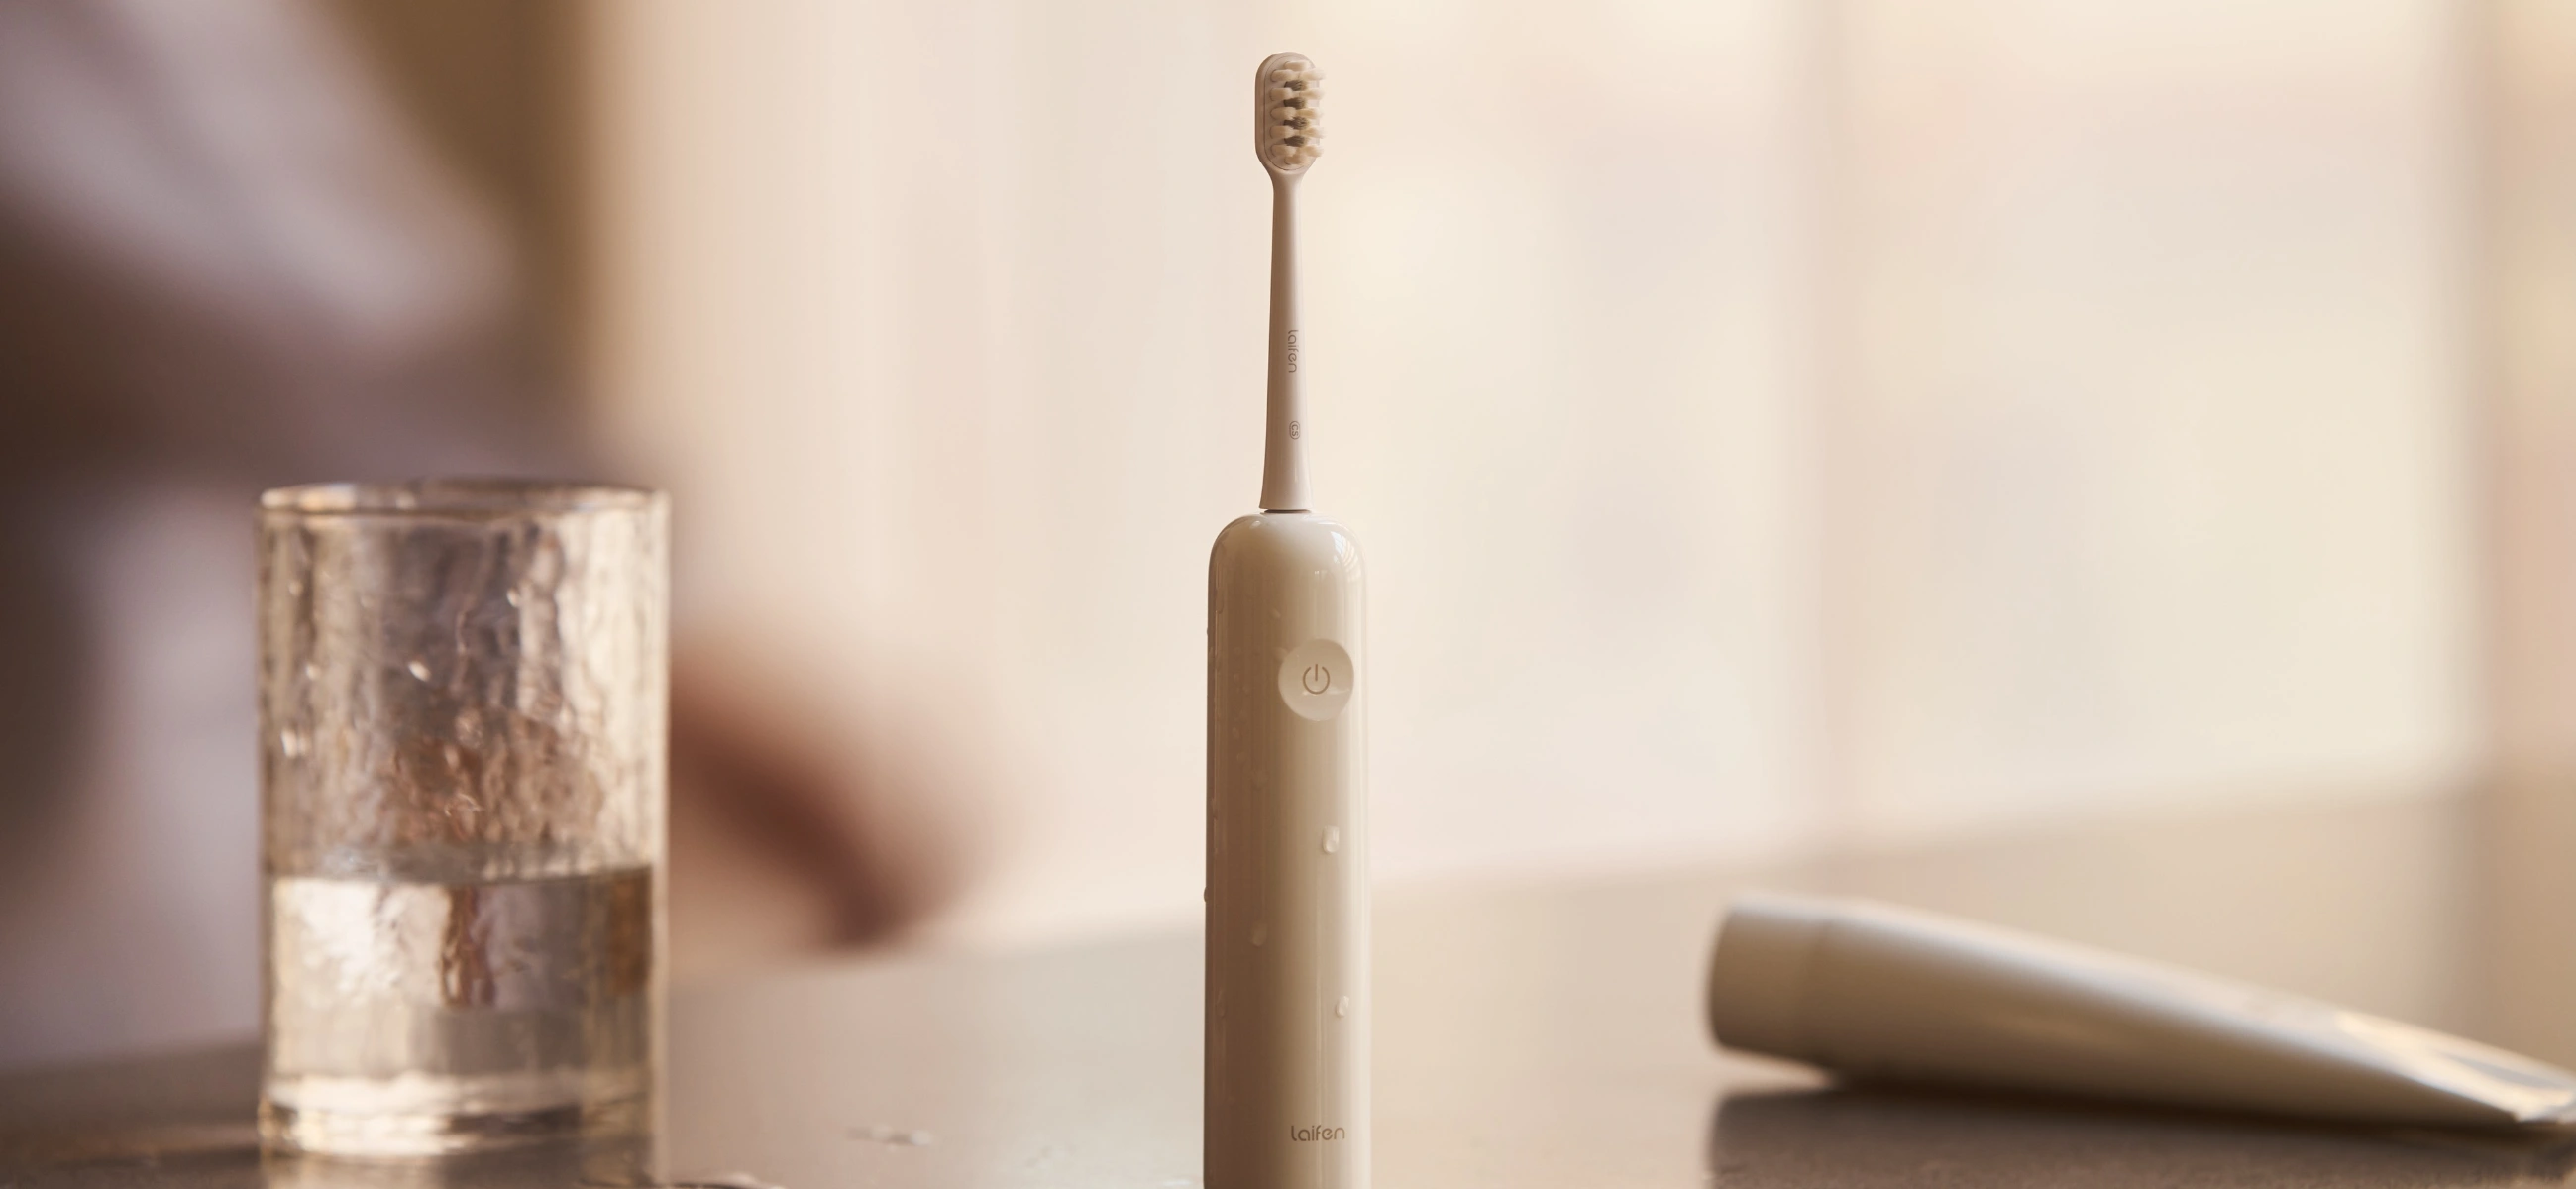 The best electric toothbrush for sensitive teeth and receding gums